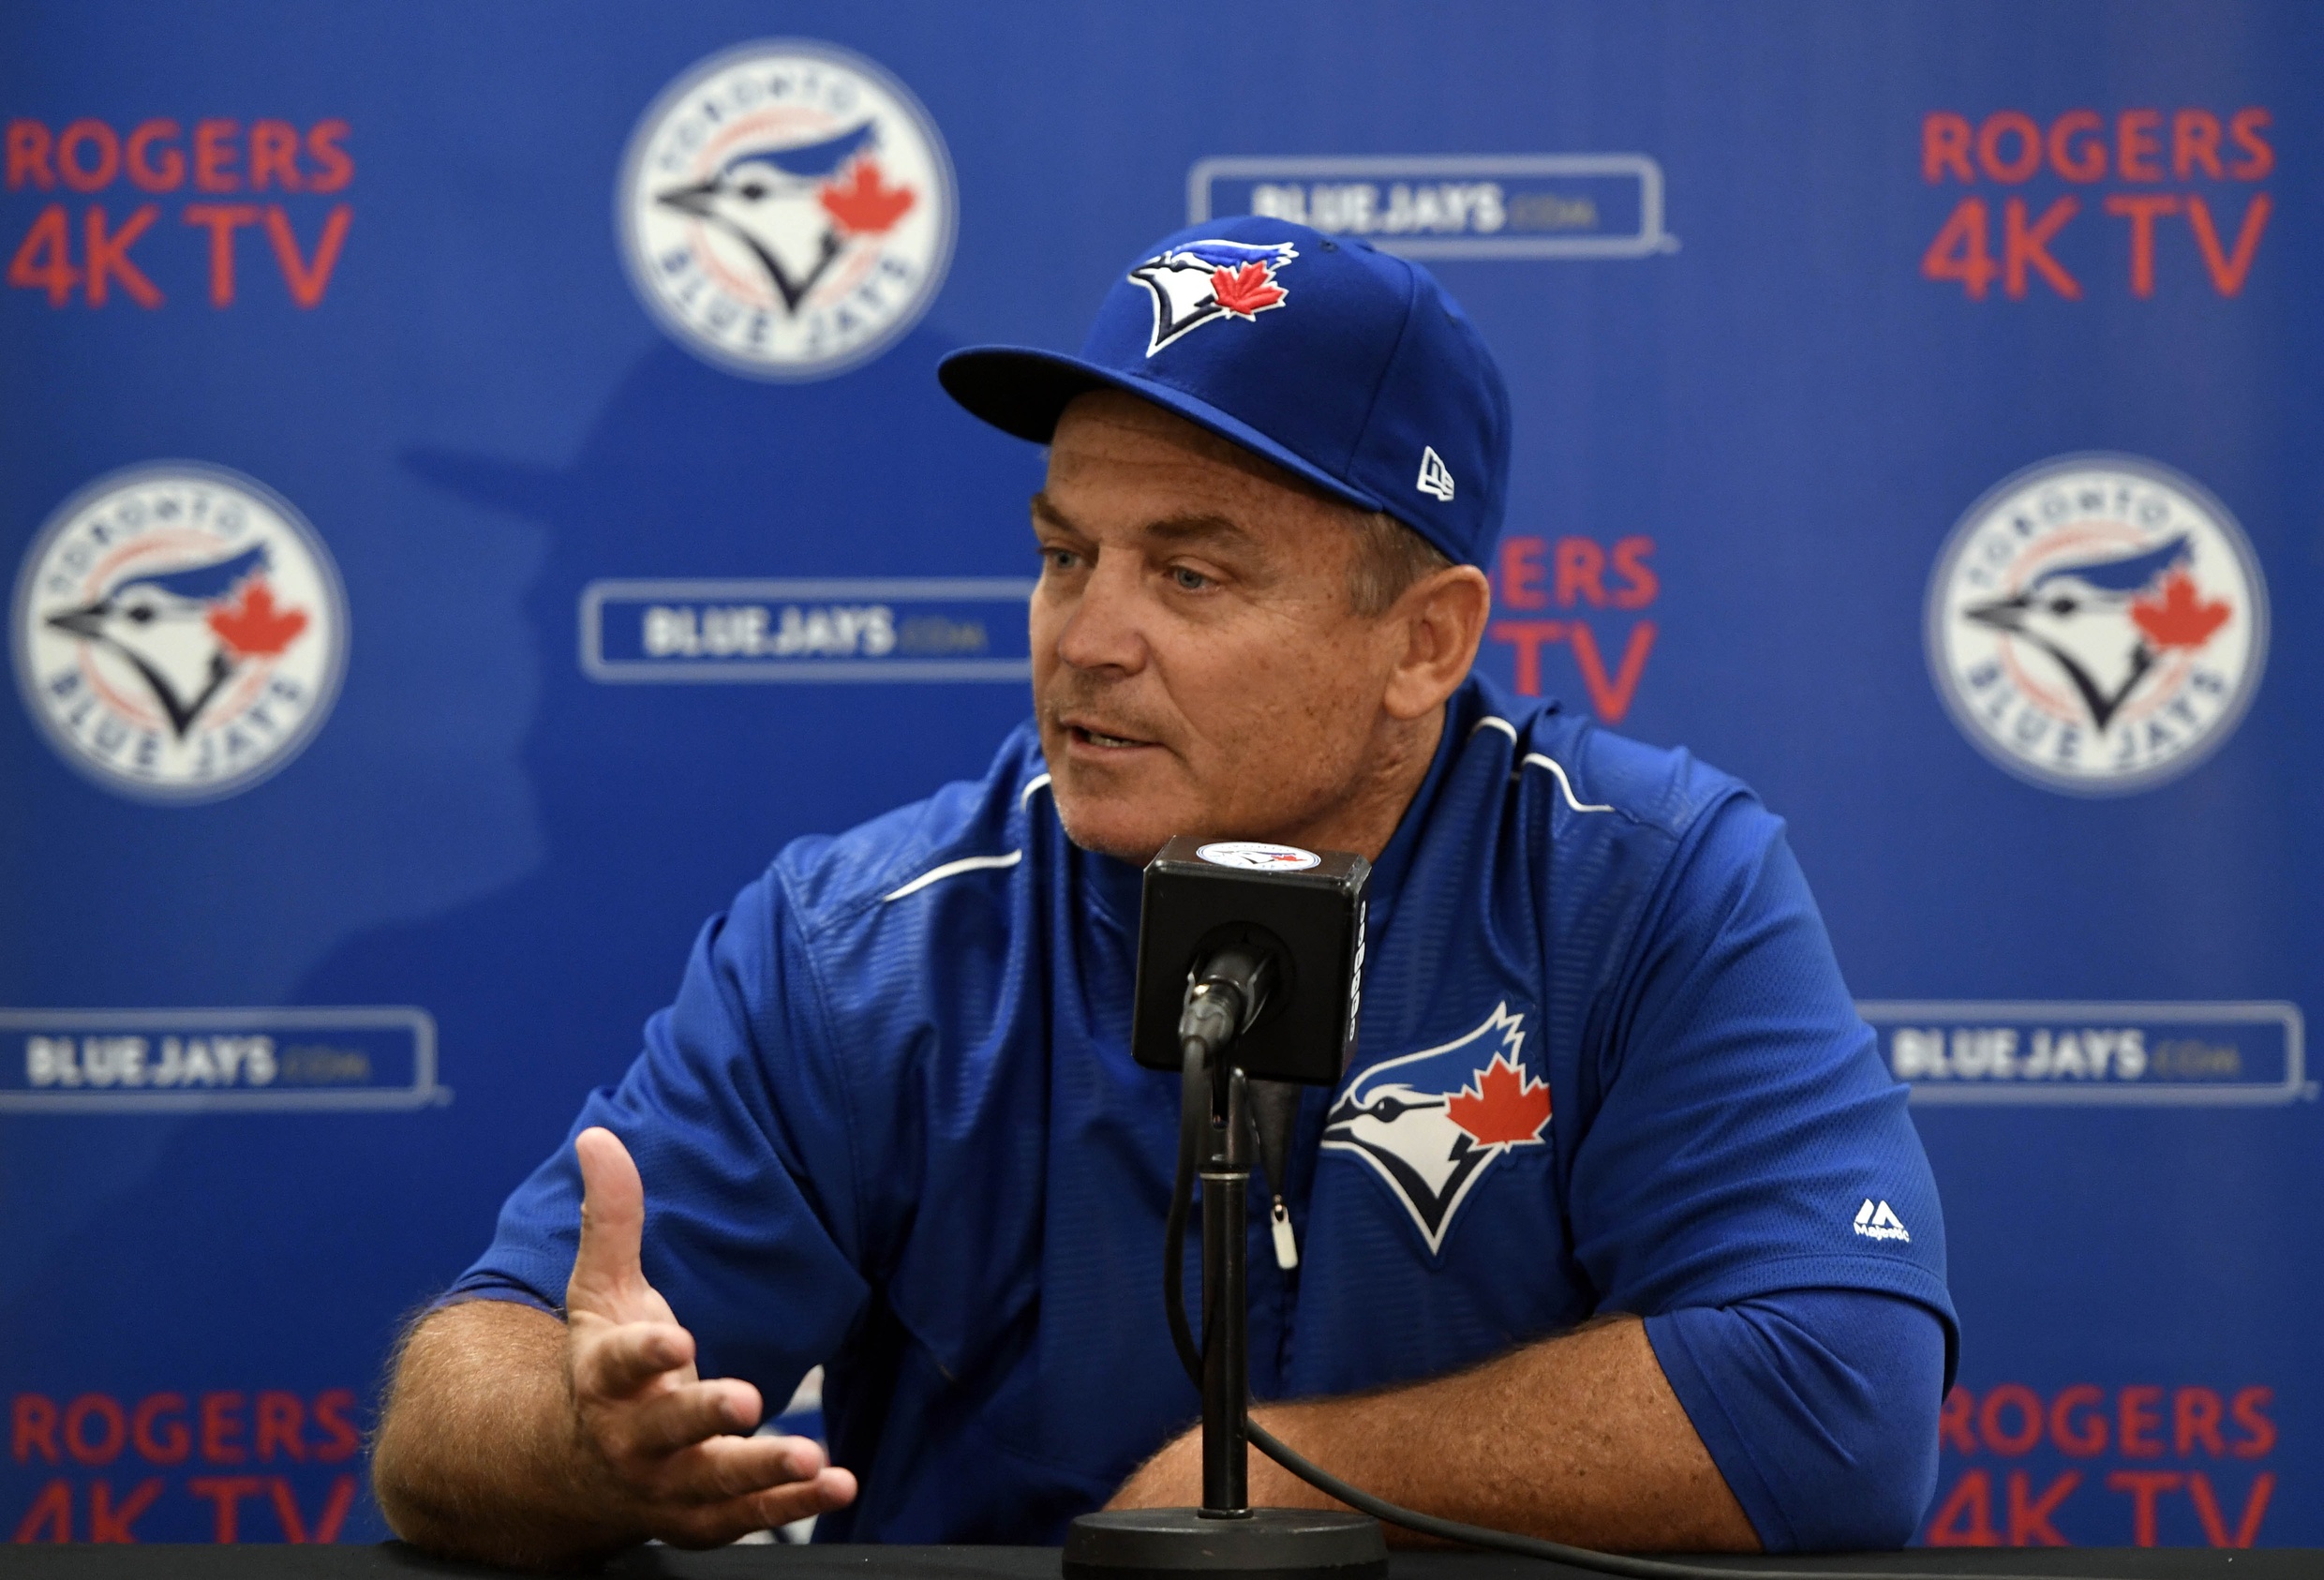 Blue Jays sign manager John Gibbons to extension